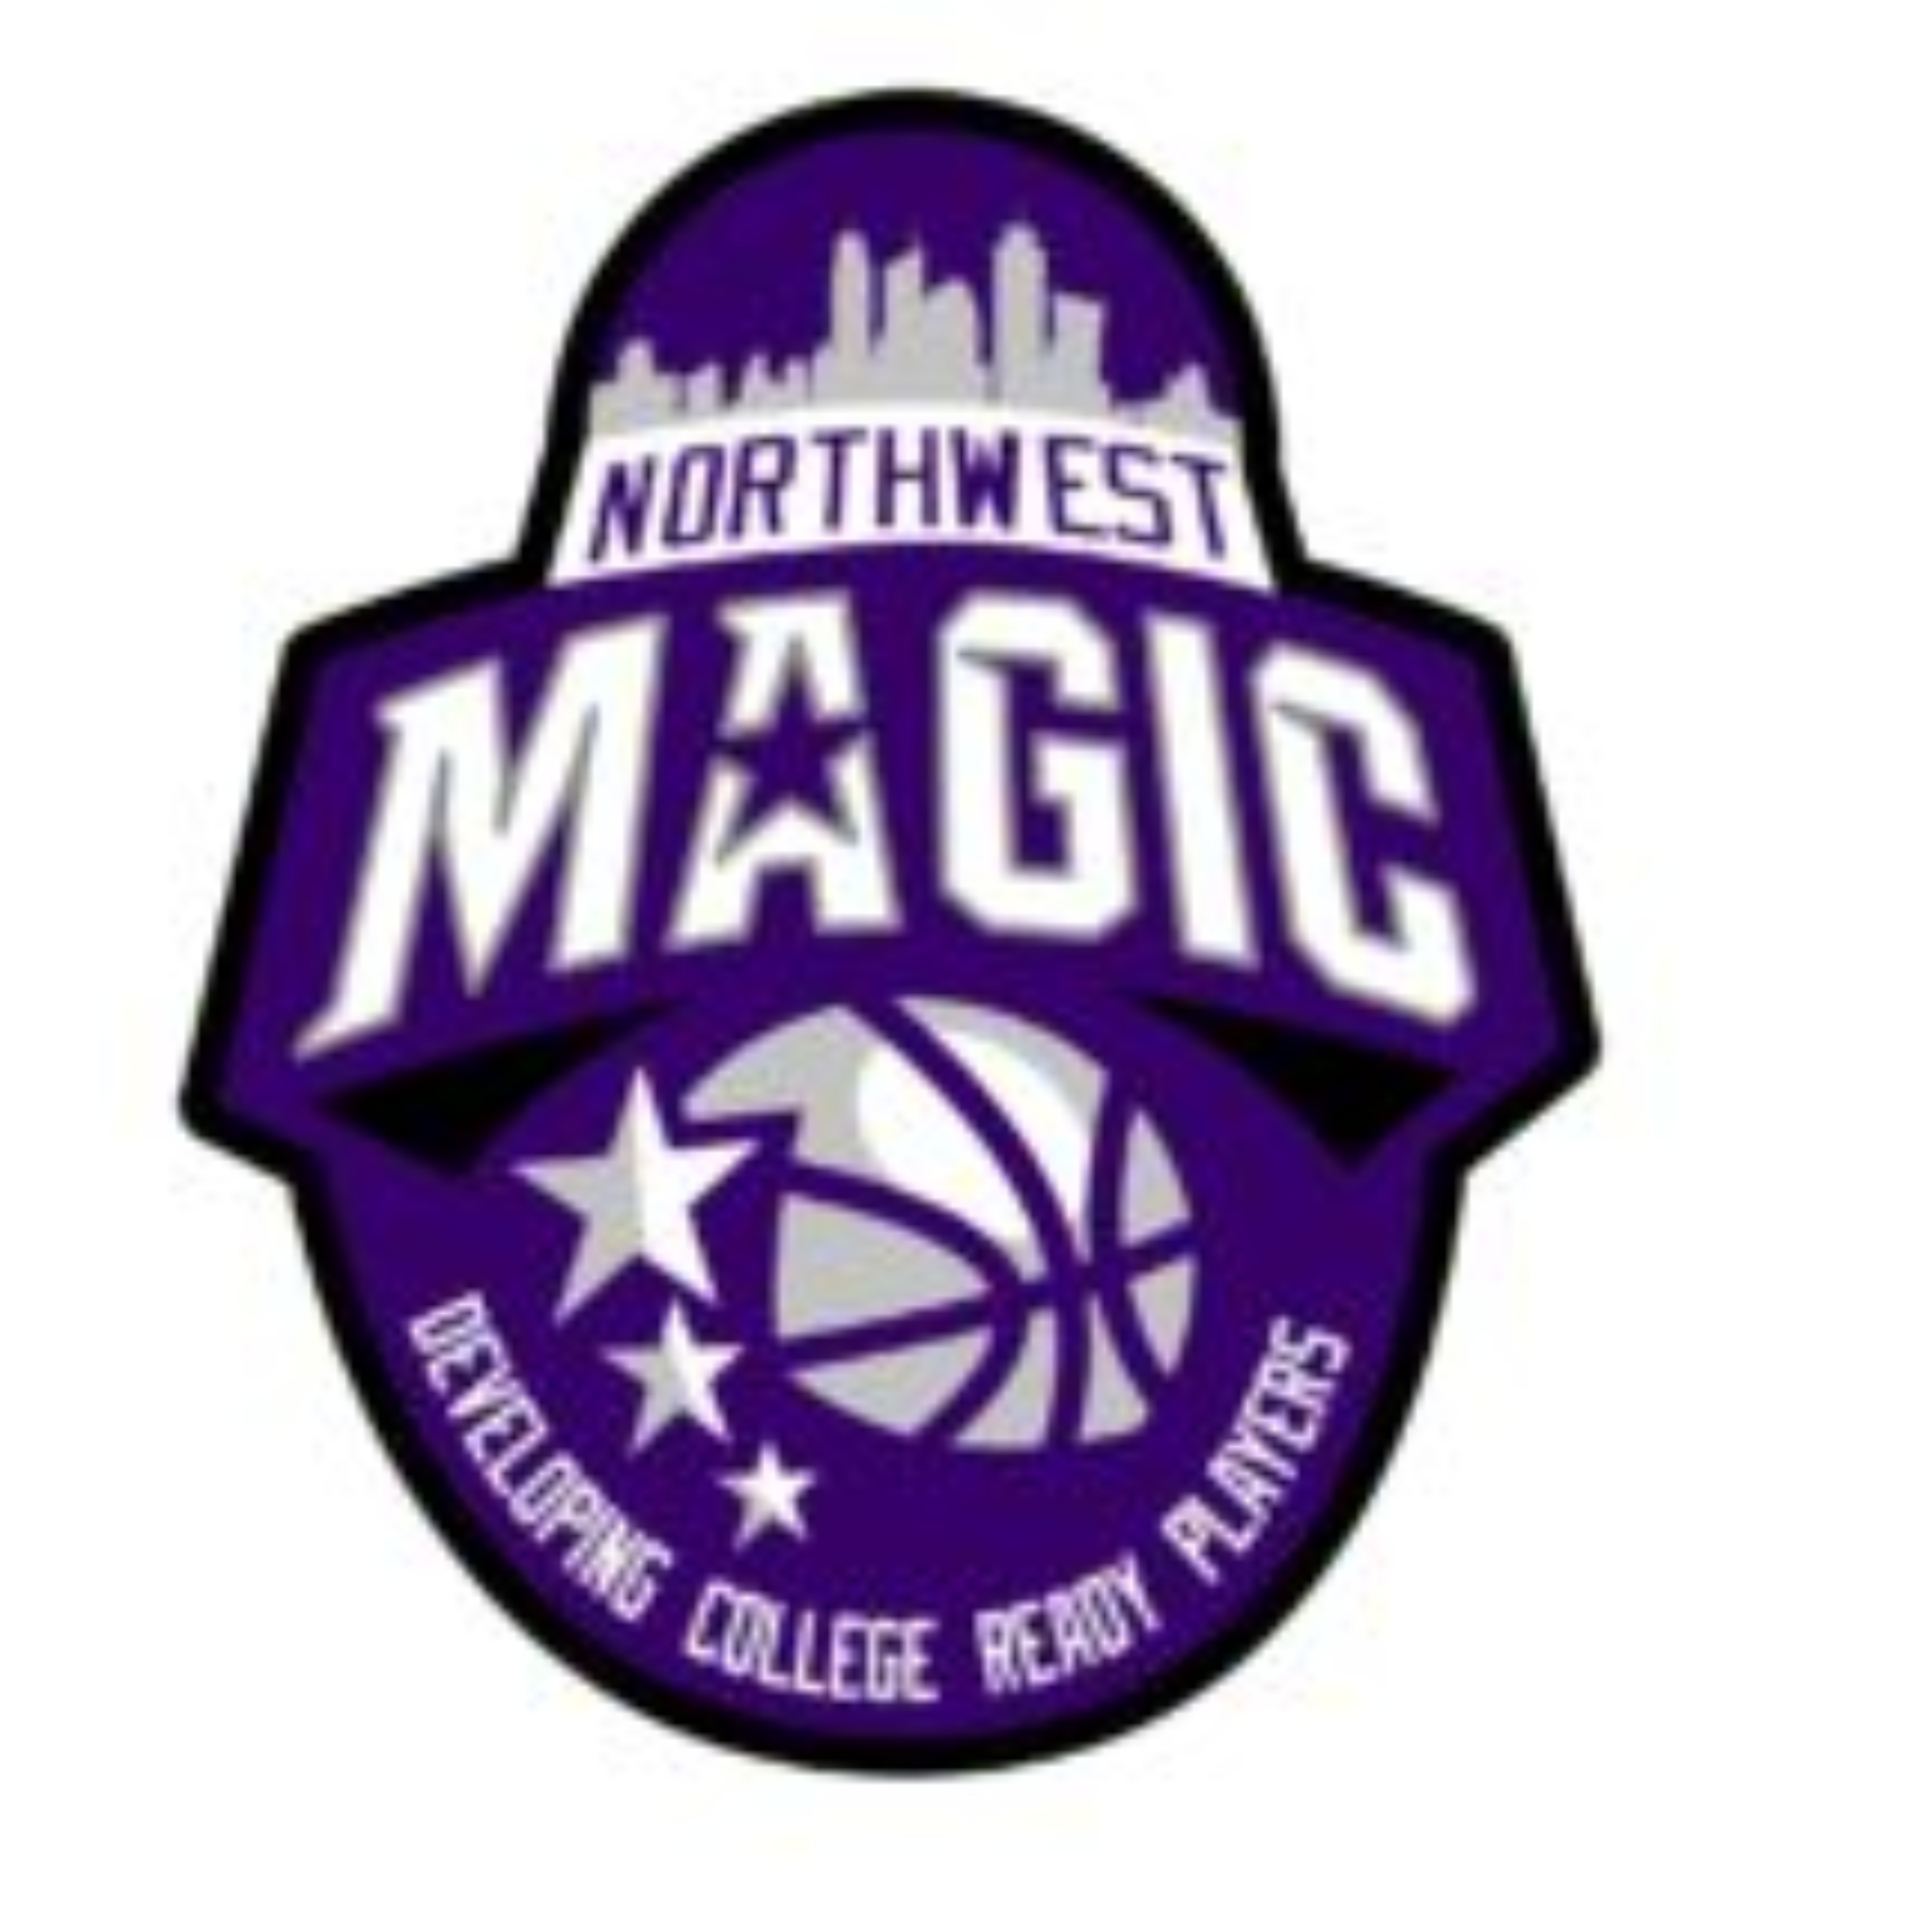 The official logo of Northwest Magic